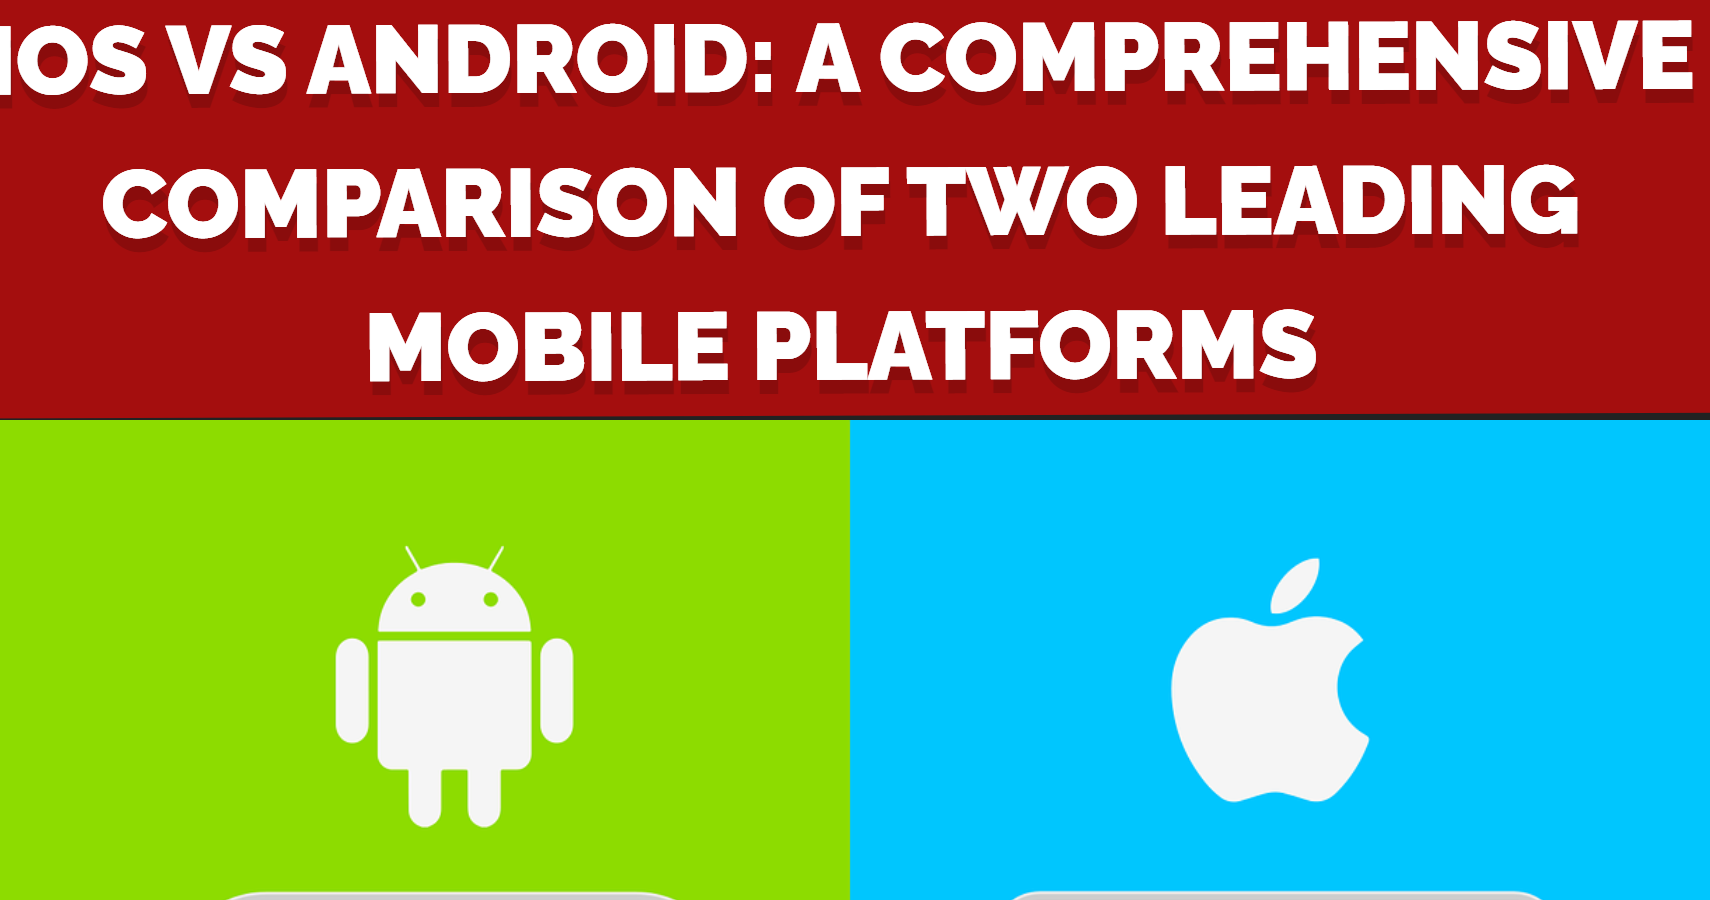 IOS vs Android: A Comprehensive Comparison of Two Leading Mobile Platforms